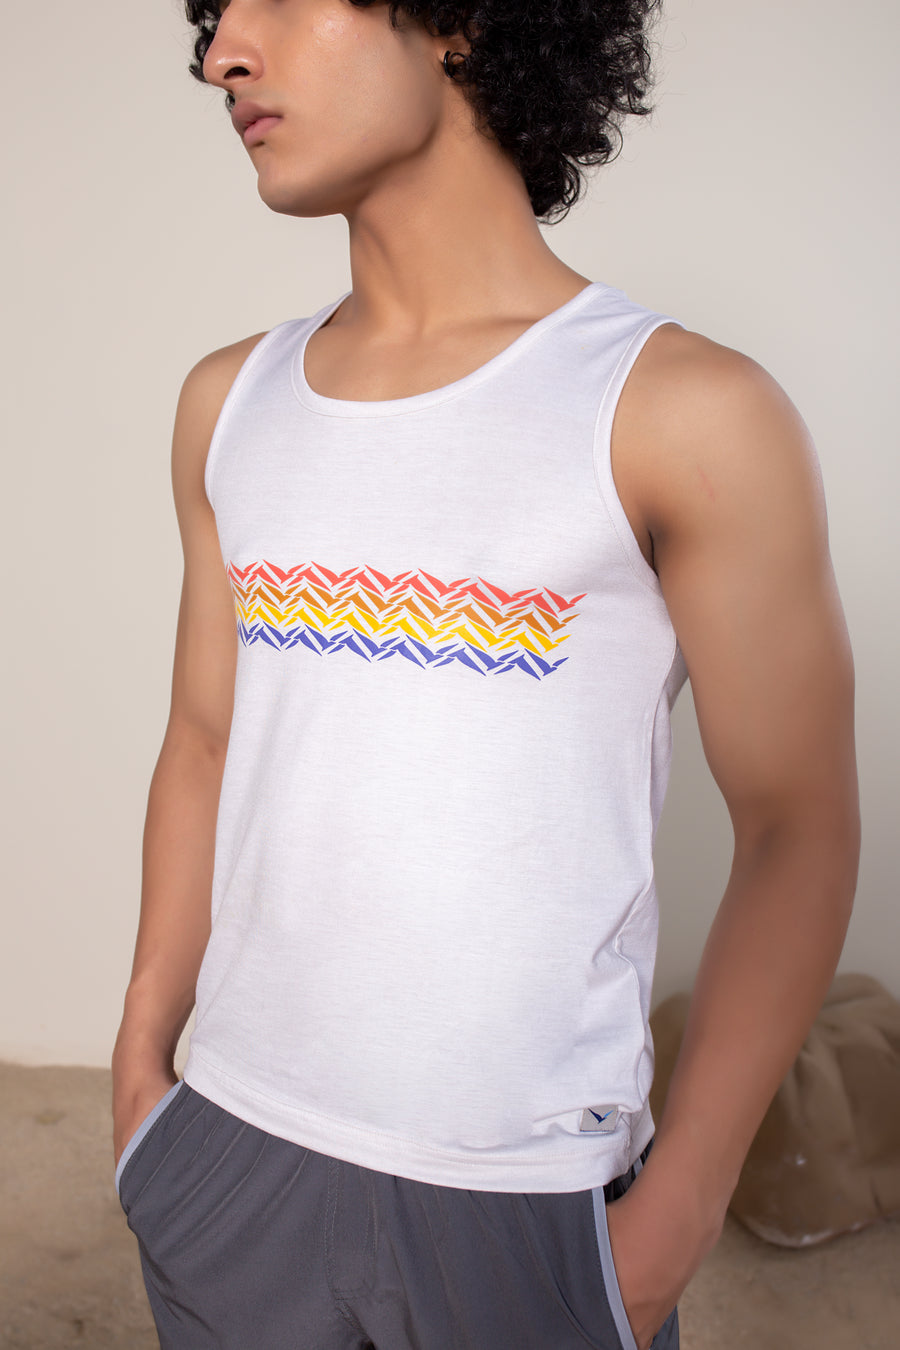 Men's Solo Bamboo Tank Off-White Retro VOLO Birds | VOLO Apparel | Made with a blend of bamboo fibers and a four way stretch spandex, Solo Bamboo Tank features an ultra soft tank that is full of features. The bamboo fibers are naturally odor resistant and antimicrobial, the fit is a tailored fit, each tank features a unique print.